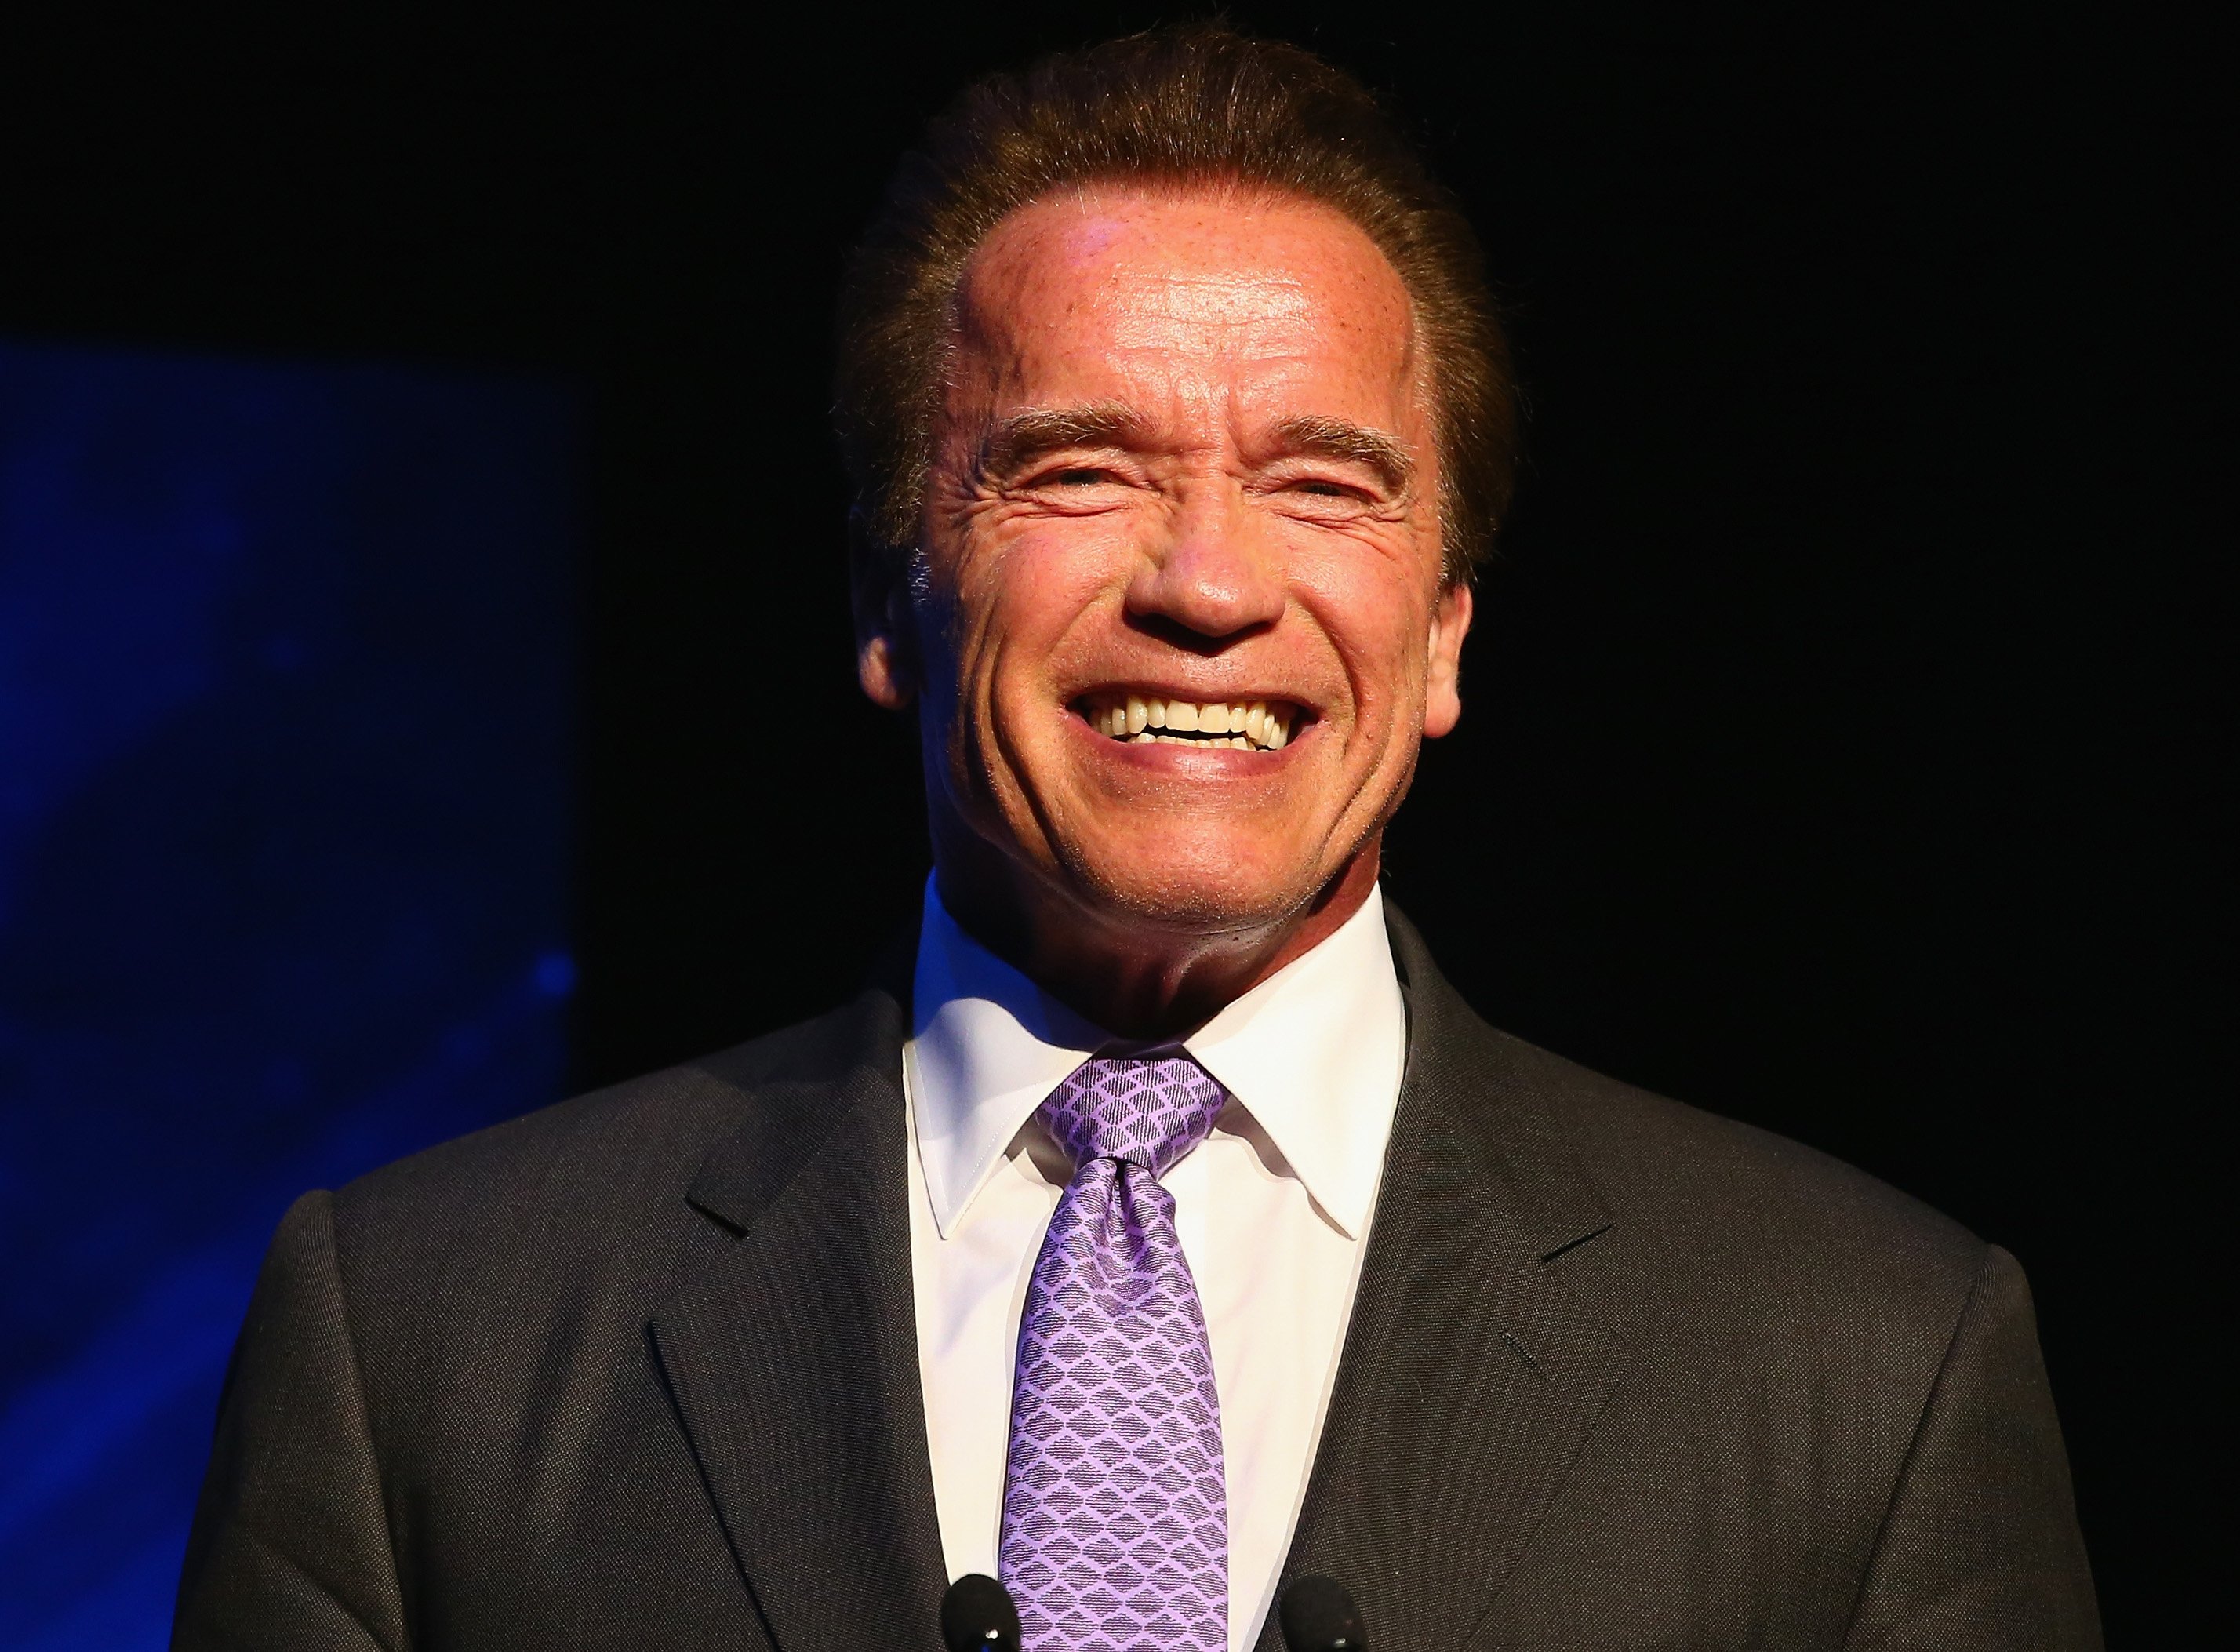 The "Terminator" star Arnold Schwarzenegger during his 2015 speaking engagement in Australia. | Photo: Getty Images